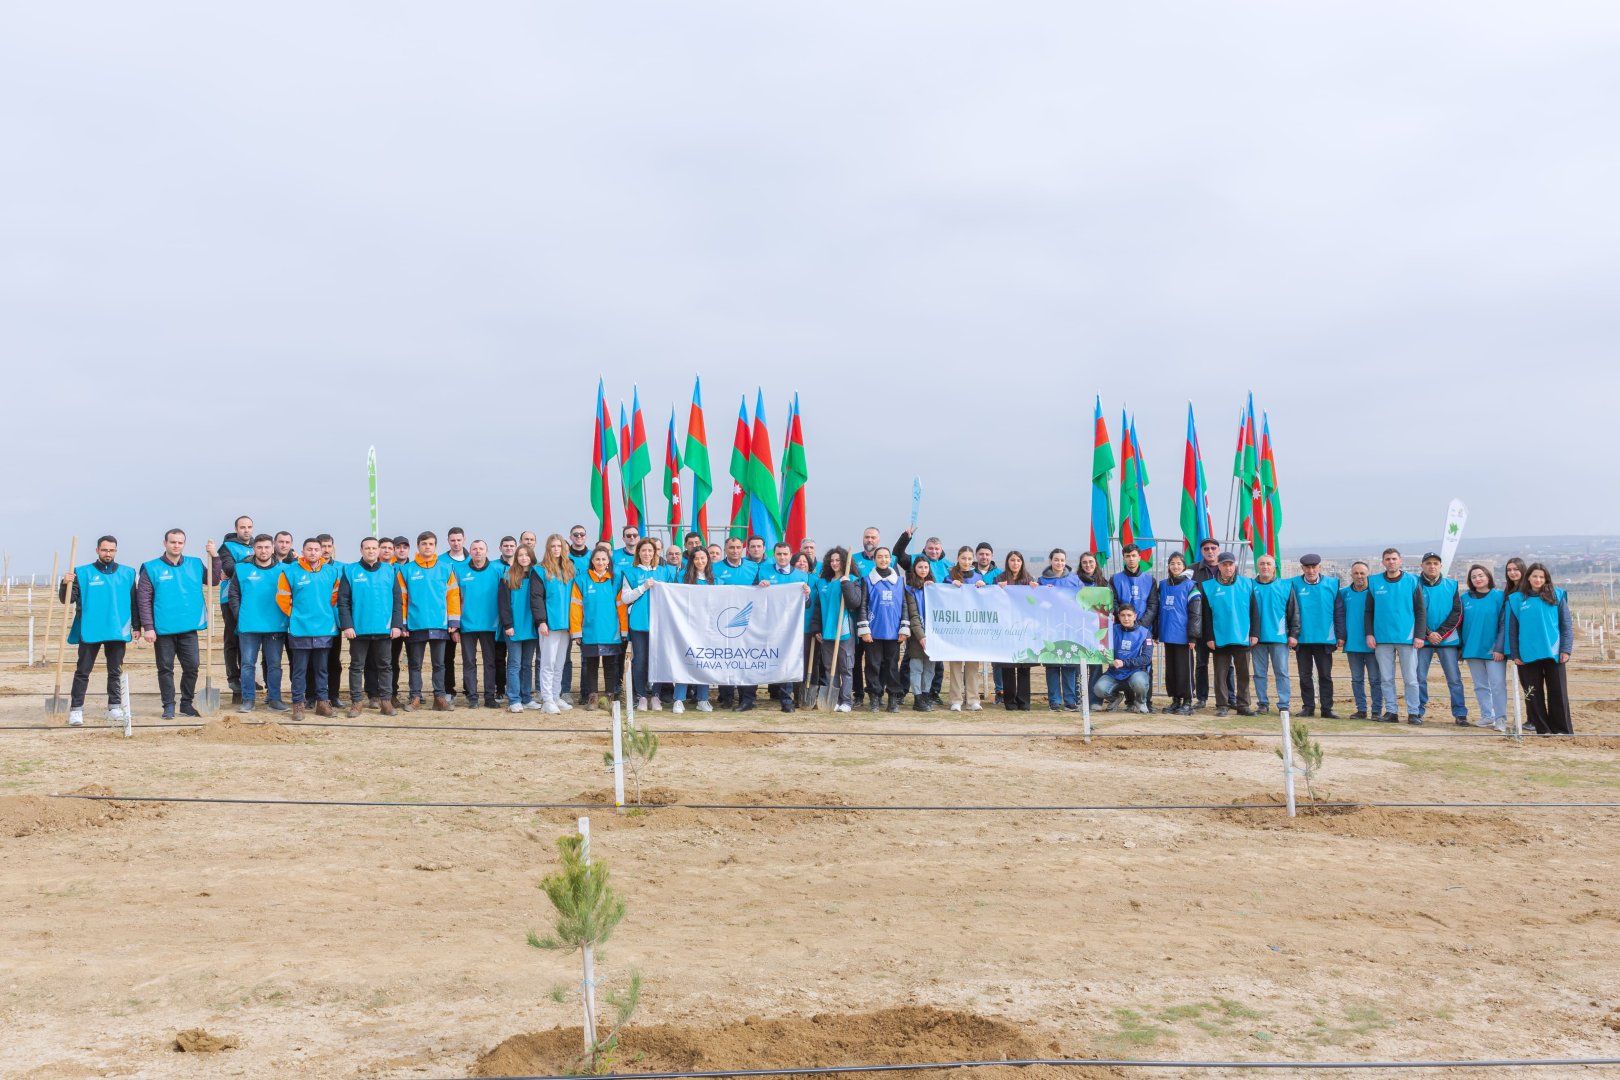 AZAL Staff Plants Over 600 Trees in Support of the "Green World Solidarity Year" [PHOTOS]